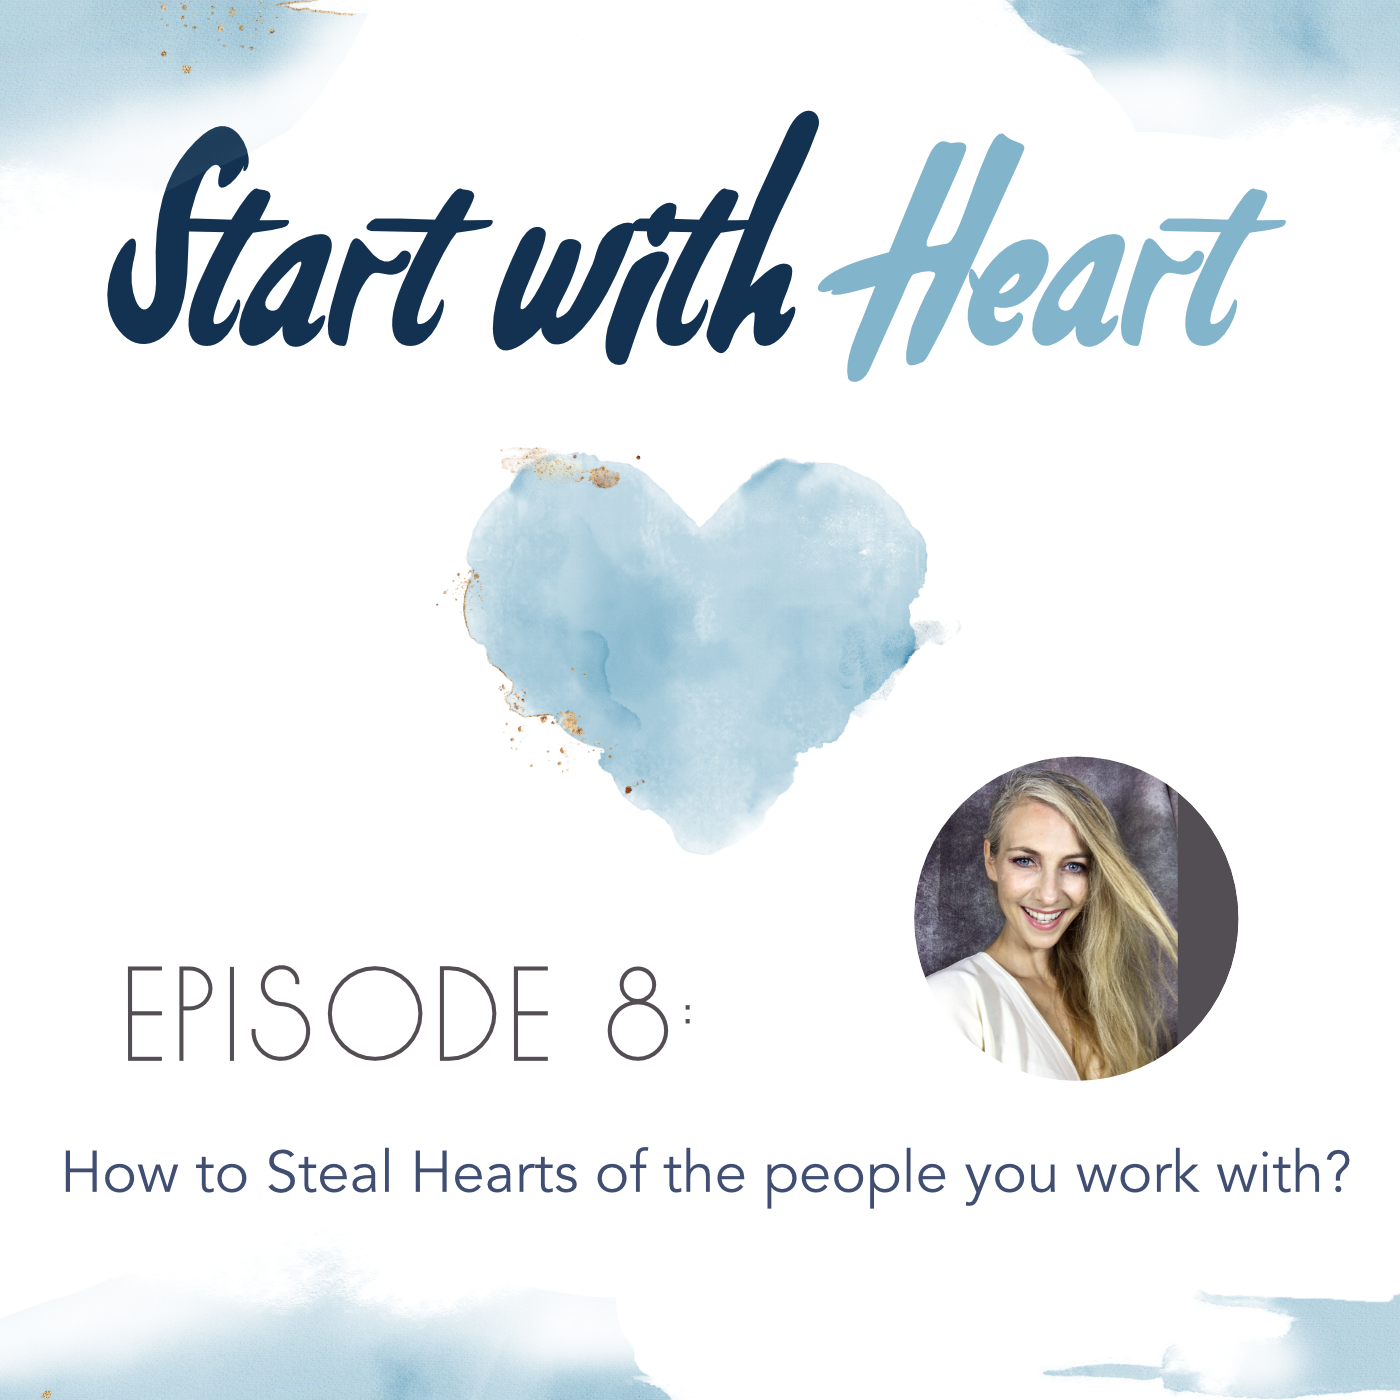 How to Steal Hearts of People You work with